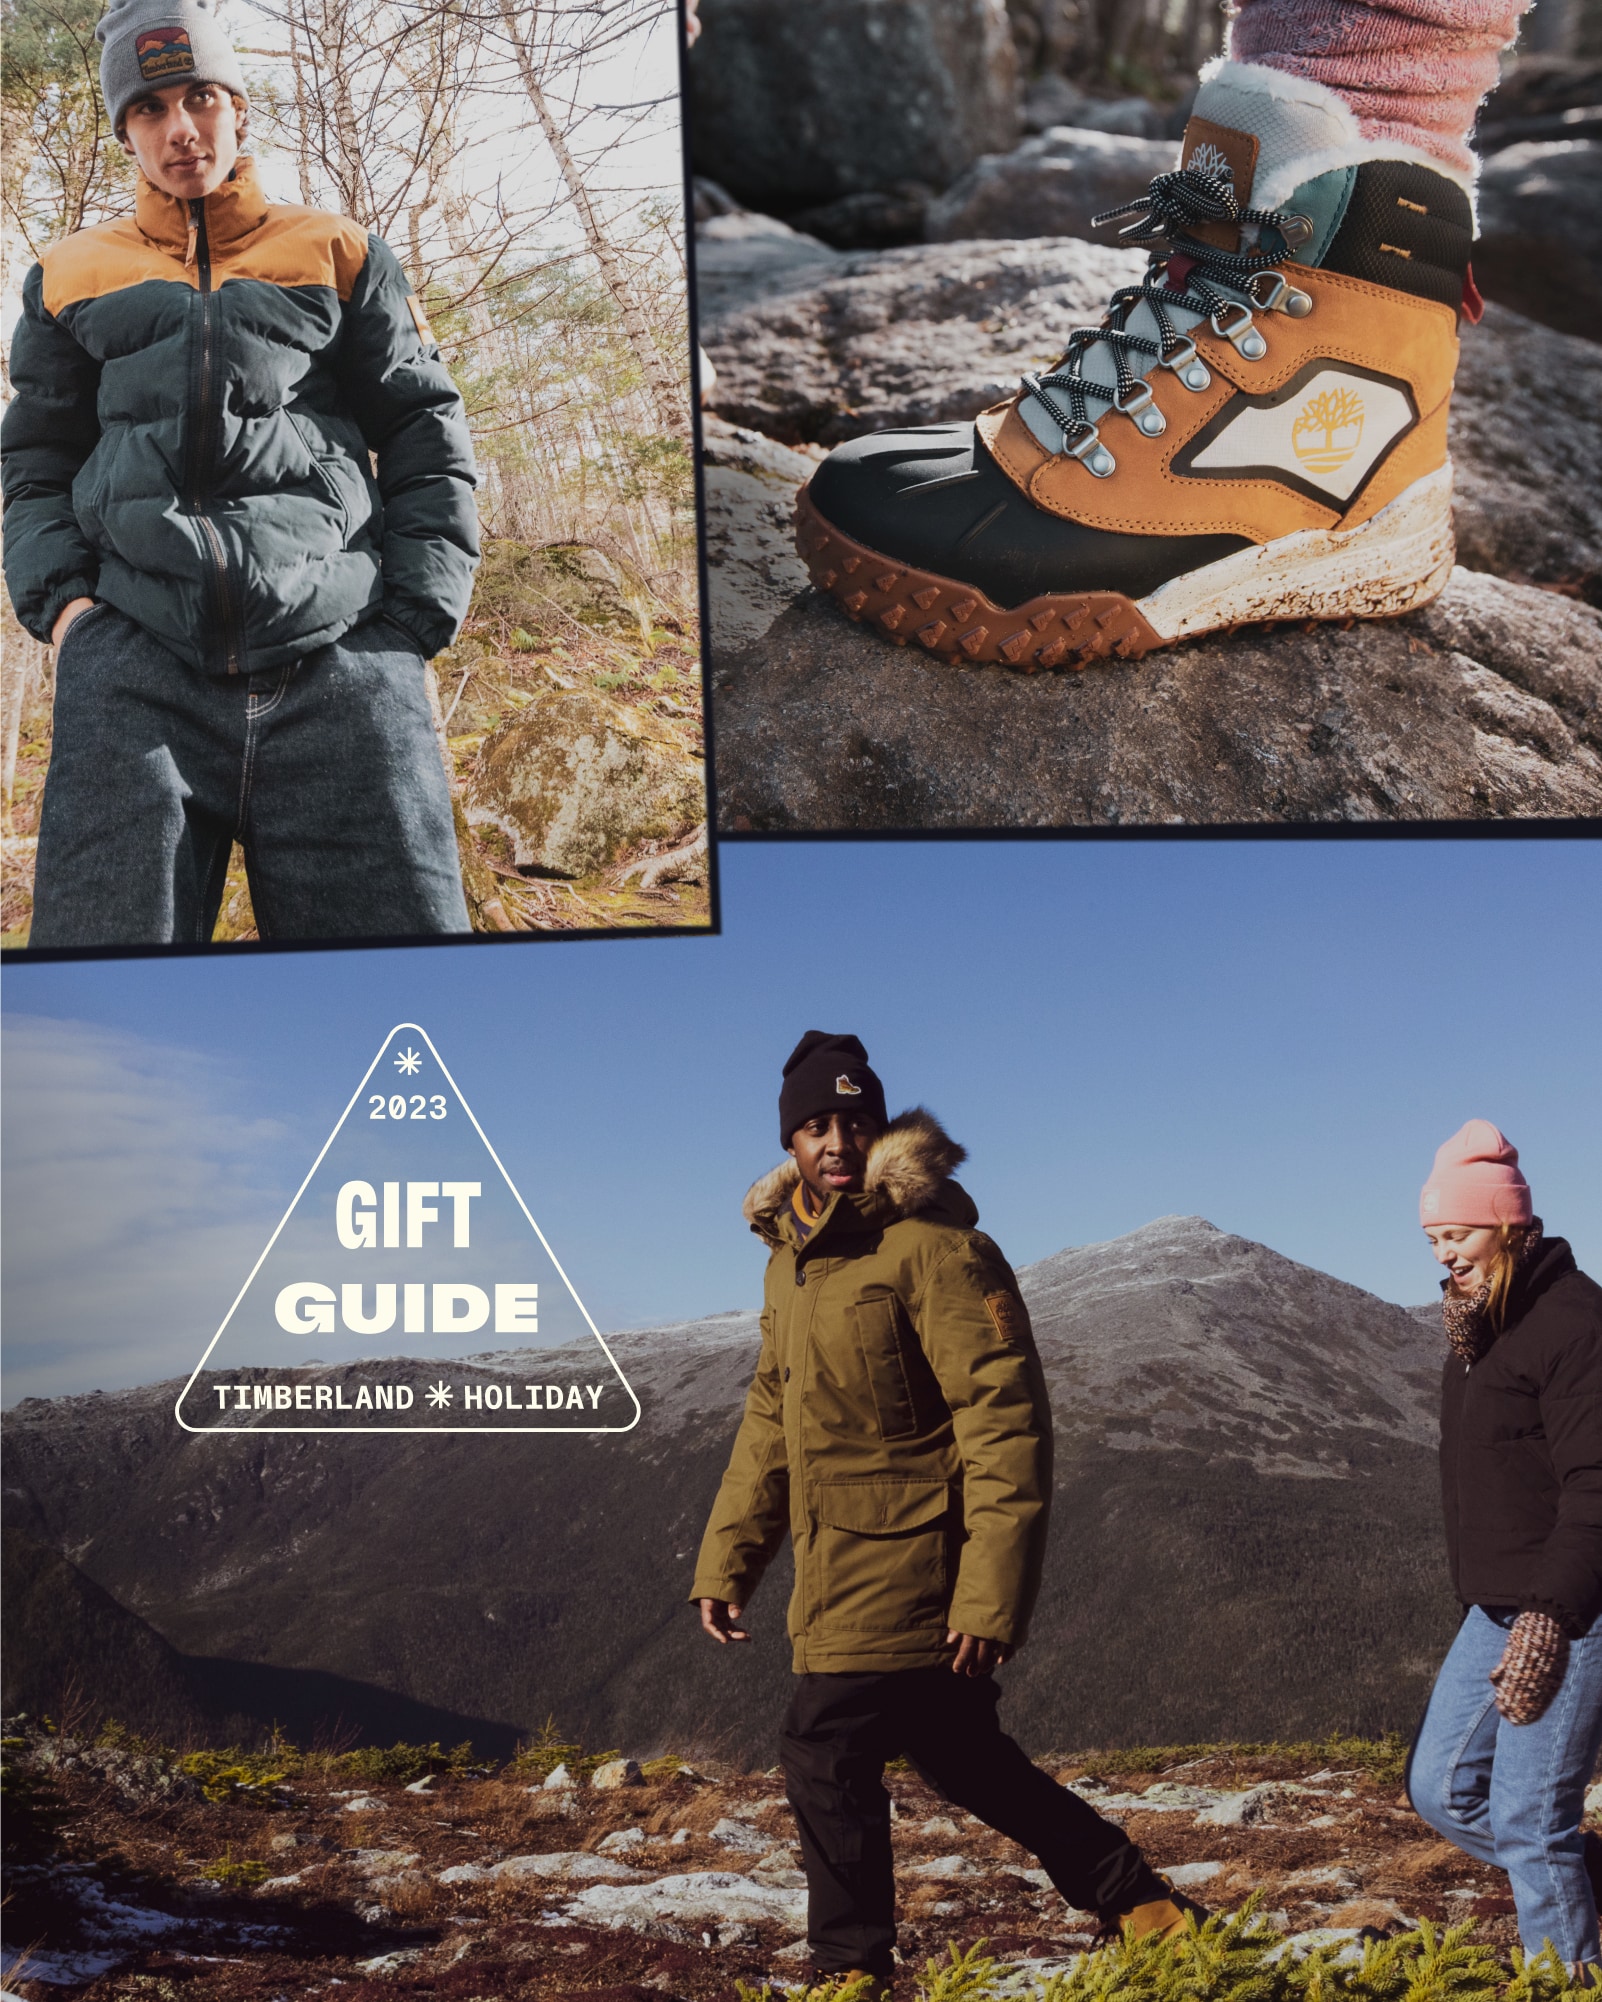 Image collage of a man and woman walking together high on a mountain path above treeline, against mountains and blue sky. He is wearing a black Timbelrand hat, black pants and a puffy olive Timberland winter coat. The woman is wearing a black Timberland winter coat, pink winter hat and jeans, with matching marled scarf and mittens. Another image is a closeup of a pair of wheat, white and black Timberland hiking boots with tree logos on the sides, on a rock from the ankles down.